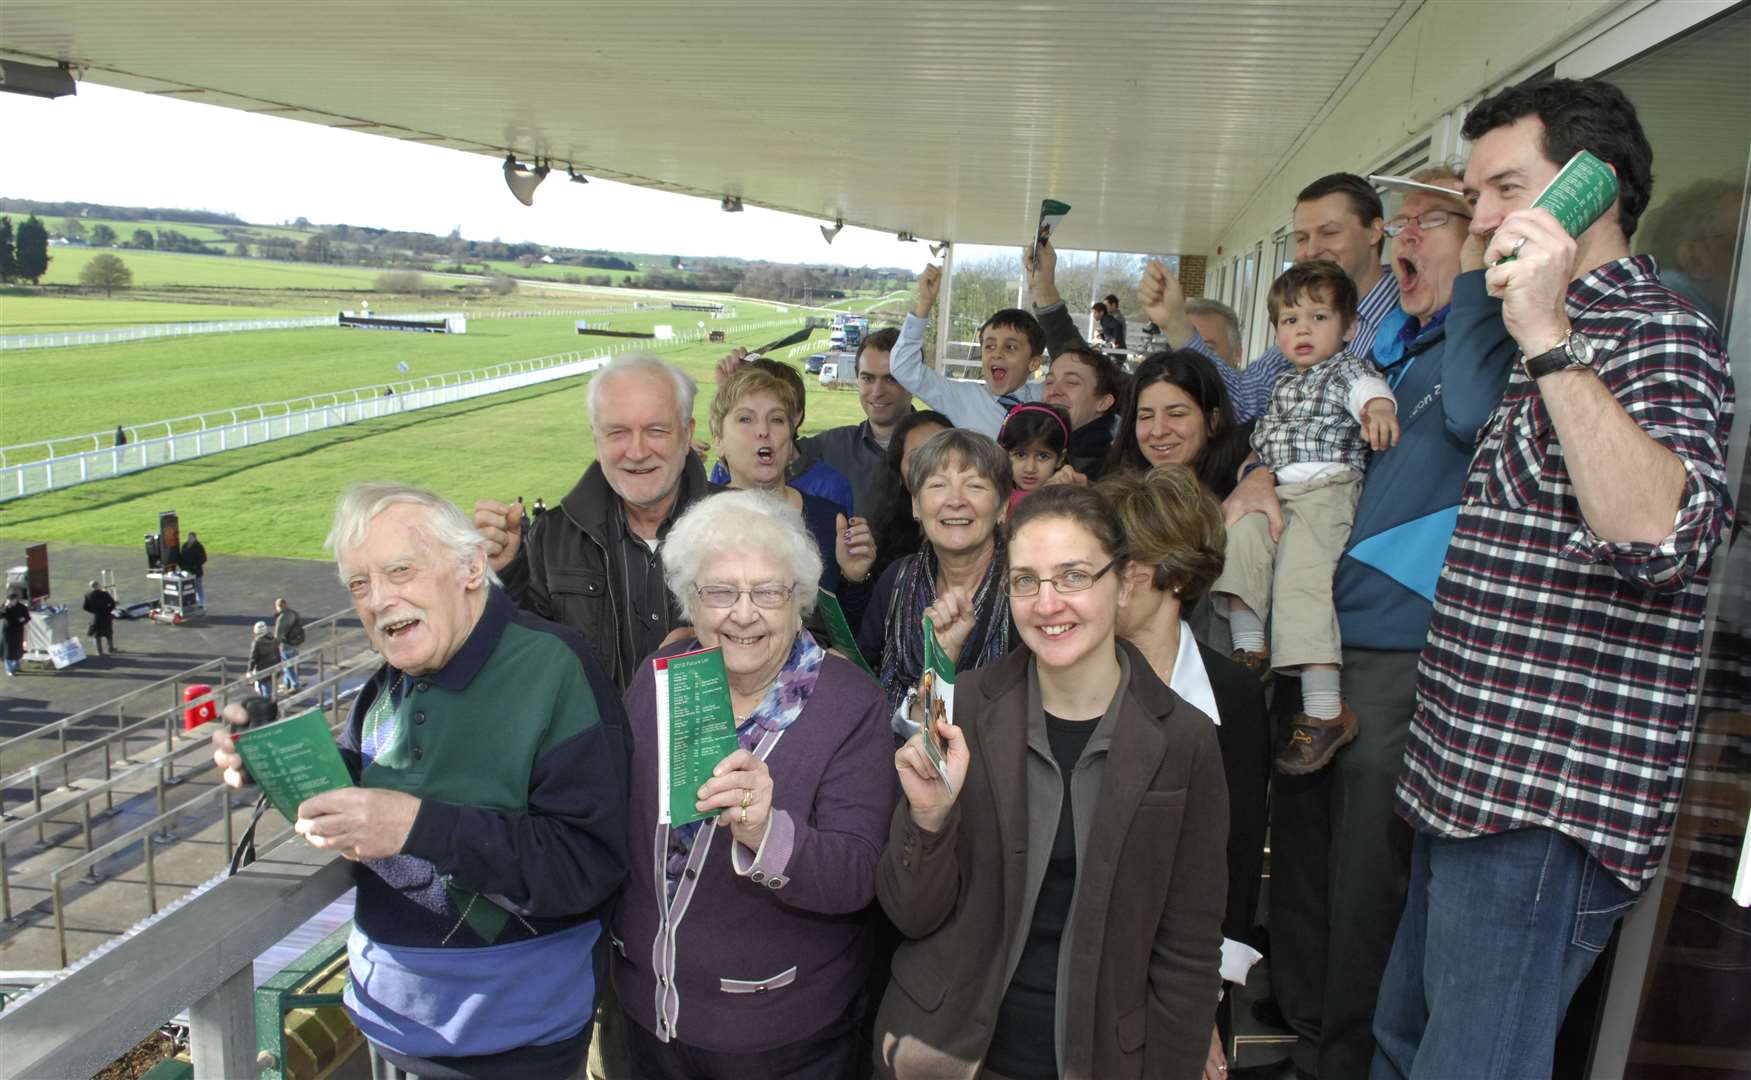 Bert Cook celebrated his 100th birthday at the races with his family in a private box in January 2012